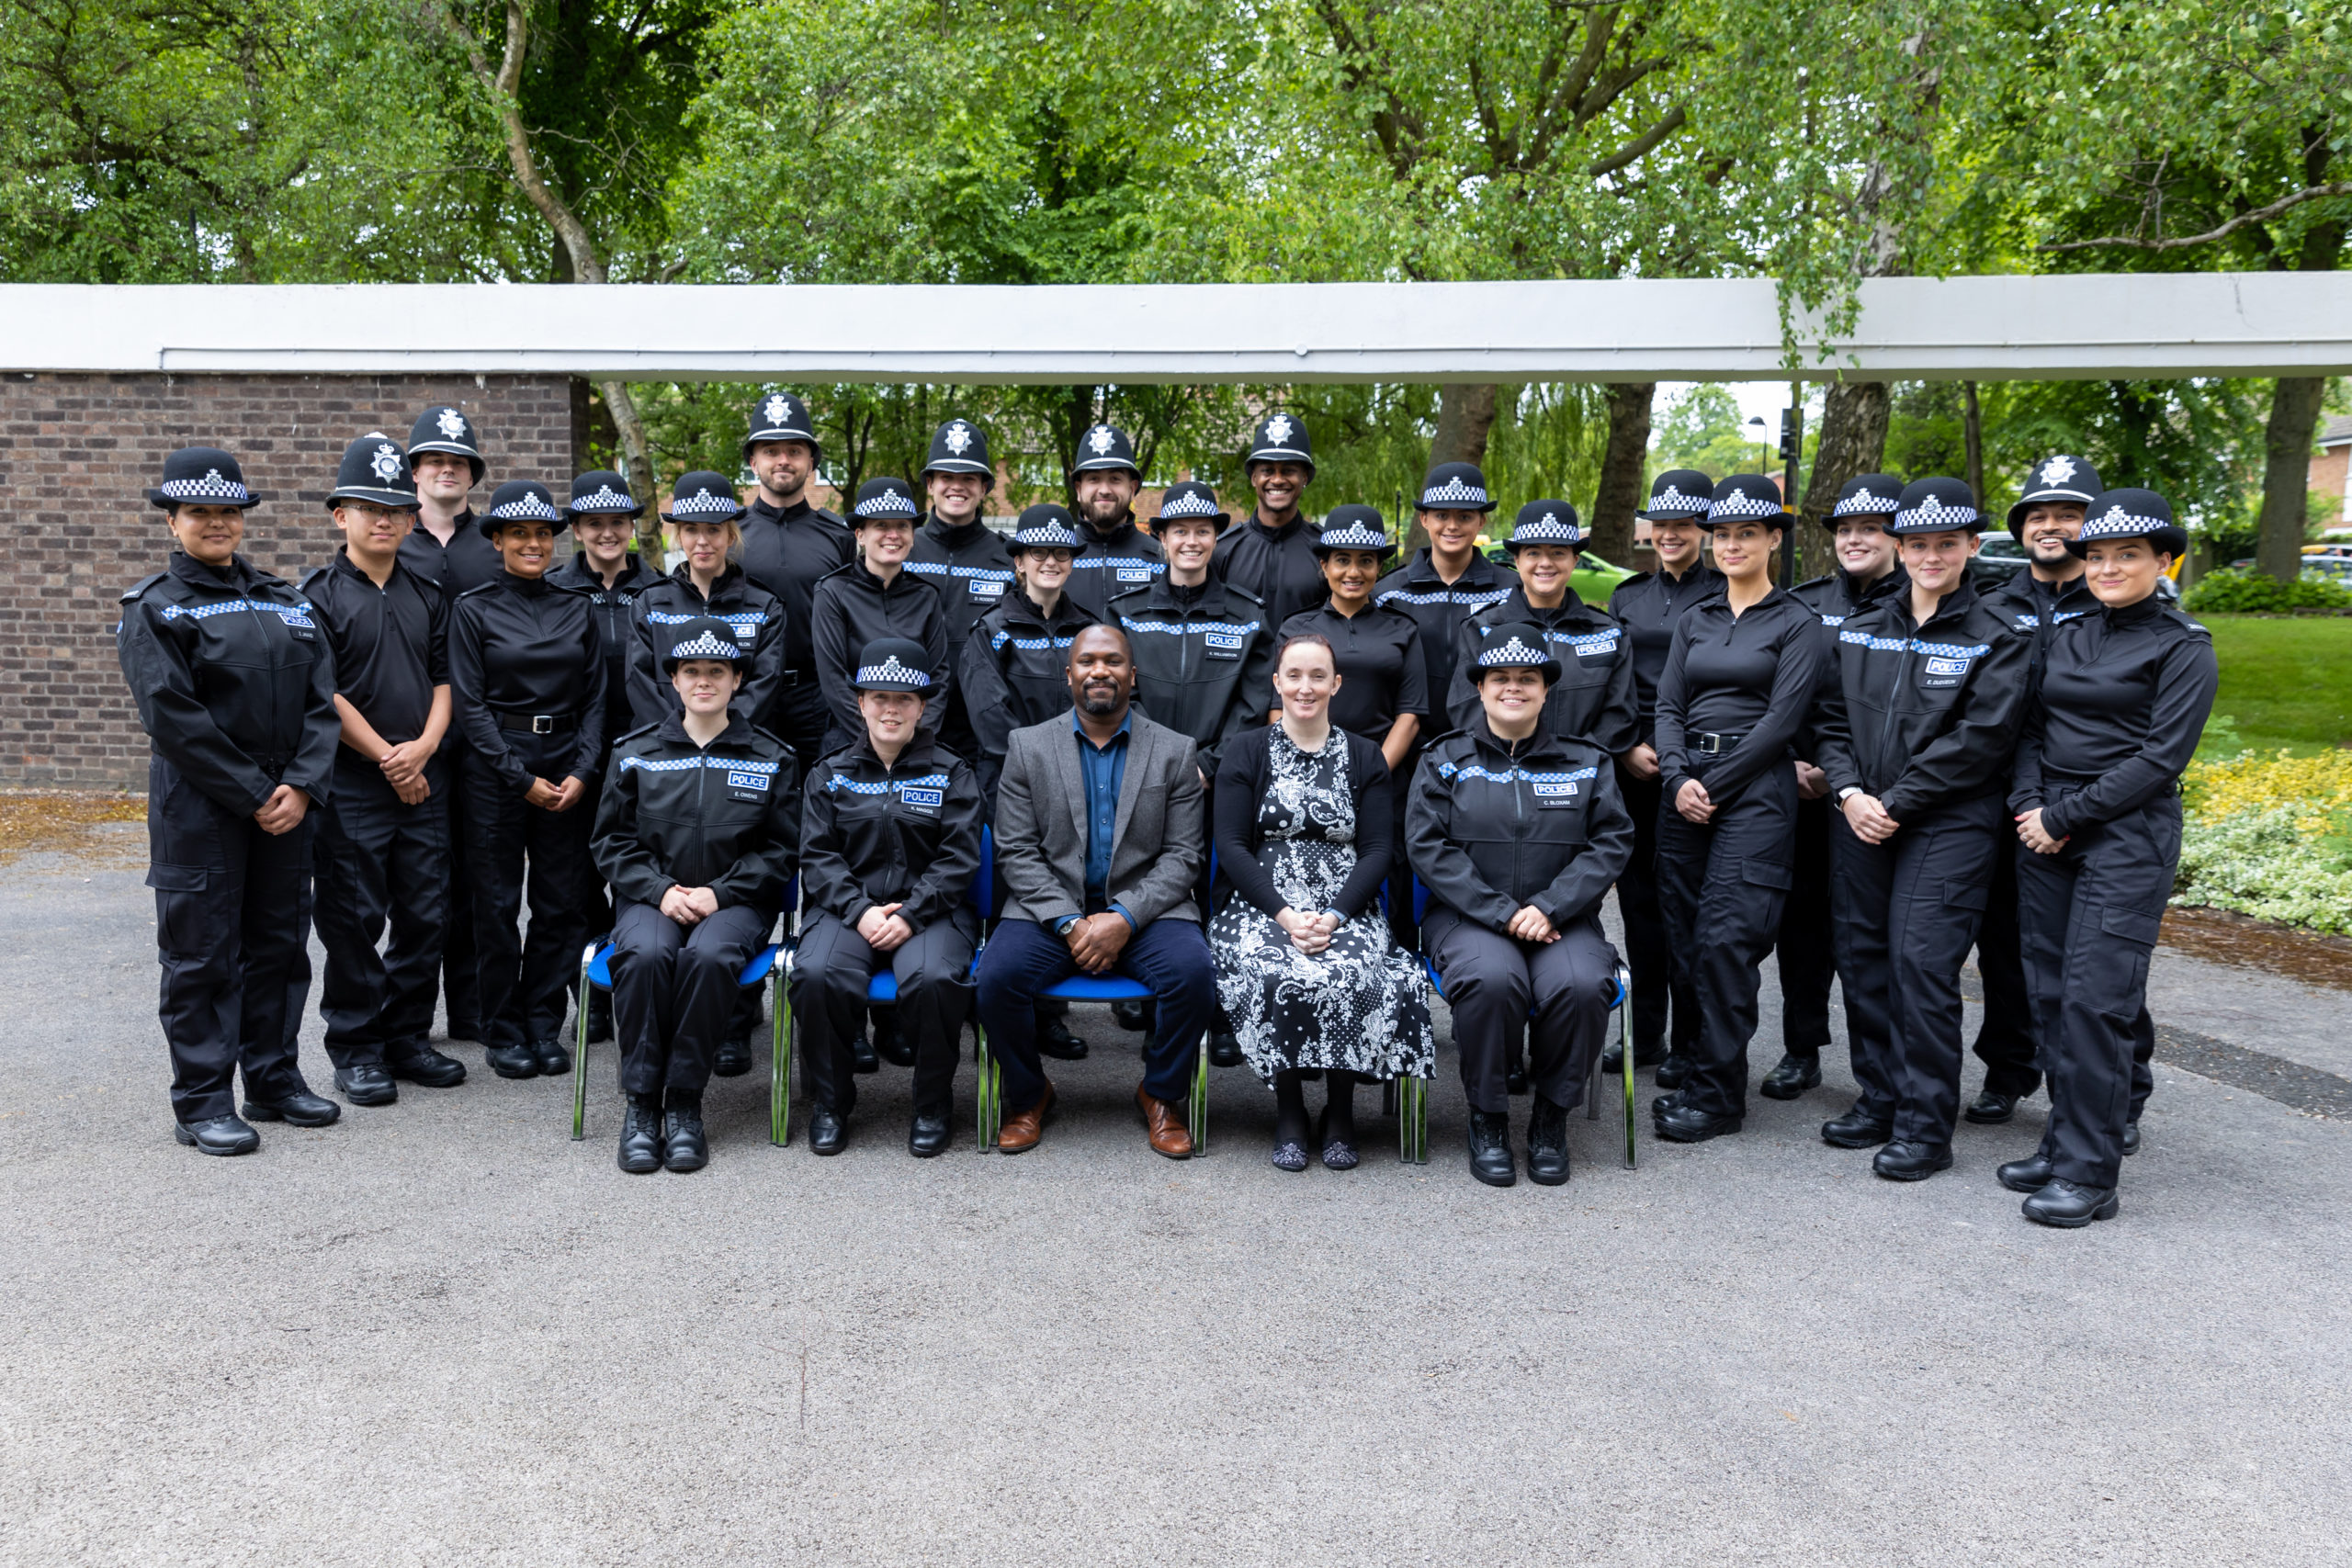 Police Now detectives joining West Midlands Police and their academy trainers (1/2)